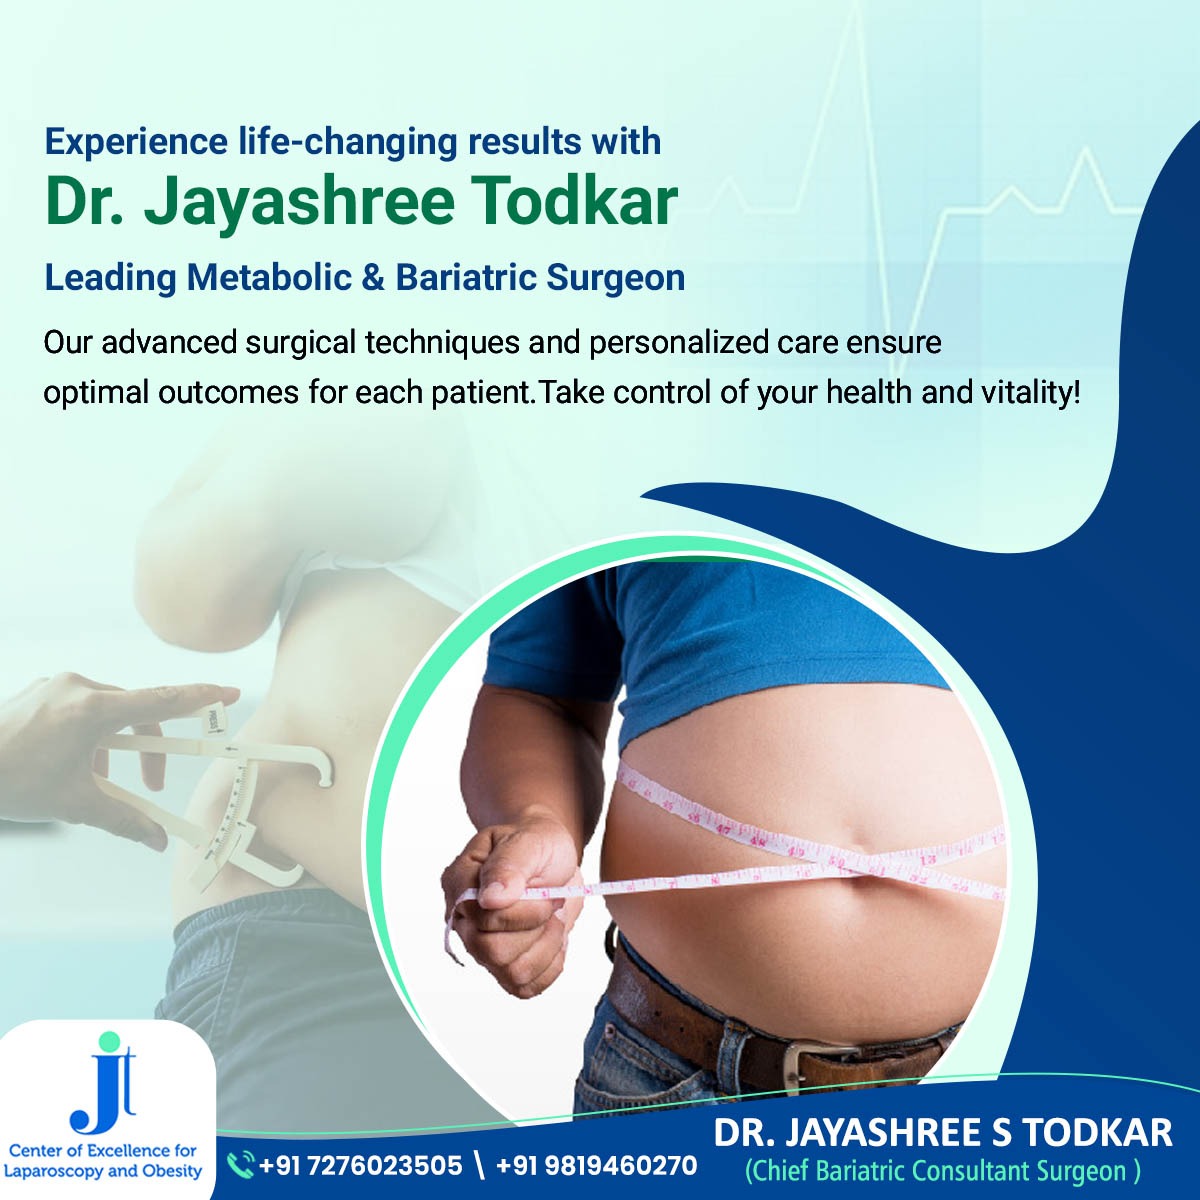 Experience life-changing results with Dr. Jayashree Todkar
Leading Metabolic & Bariatric Surgeon

.
.
.
.
.
#LifeChangingResults #DrJayashreeTodkar #MetabolicSurgeon #BariatricSurgery #PersonalizedCare #OptimalOutcomes #HealthAndVitality #TakeControl